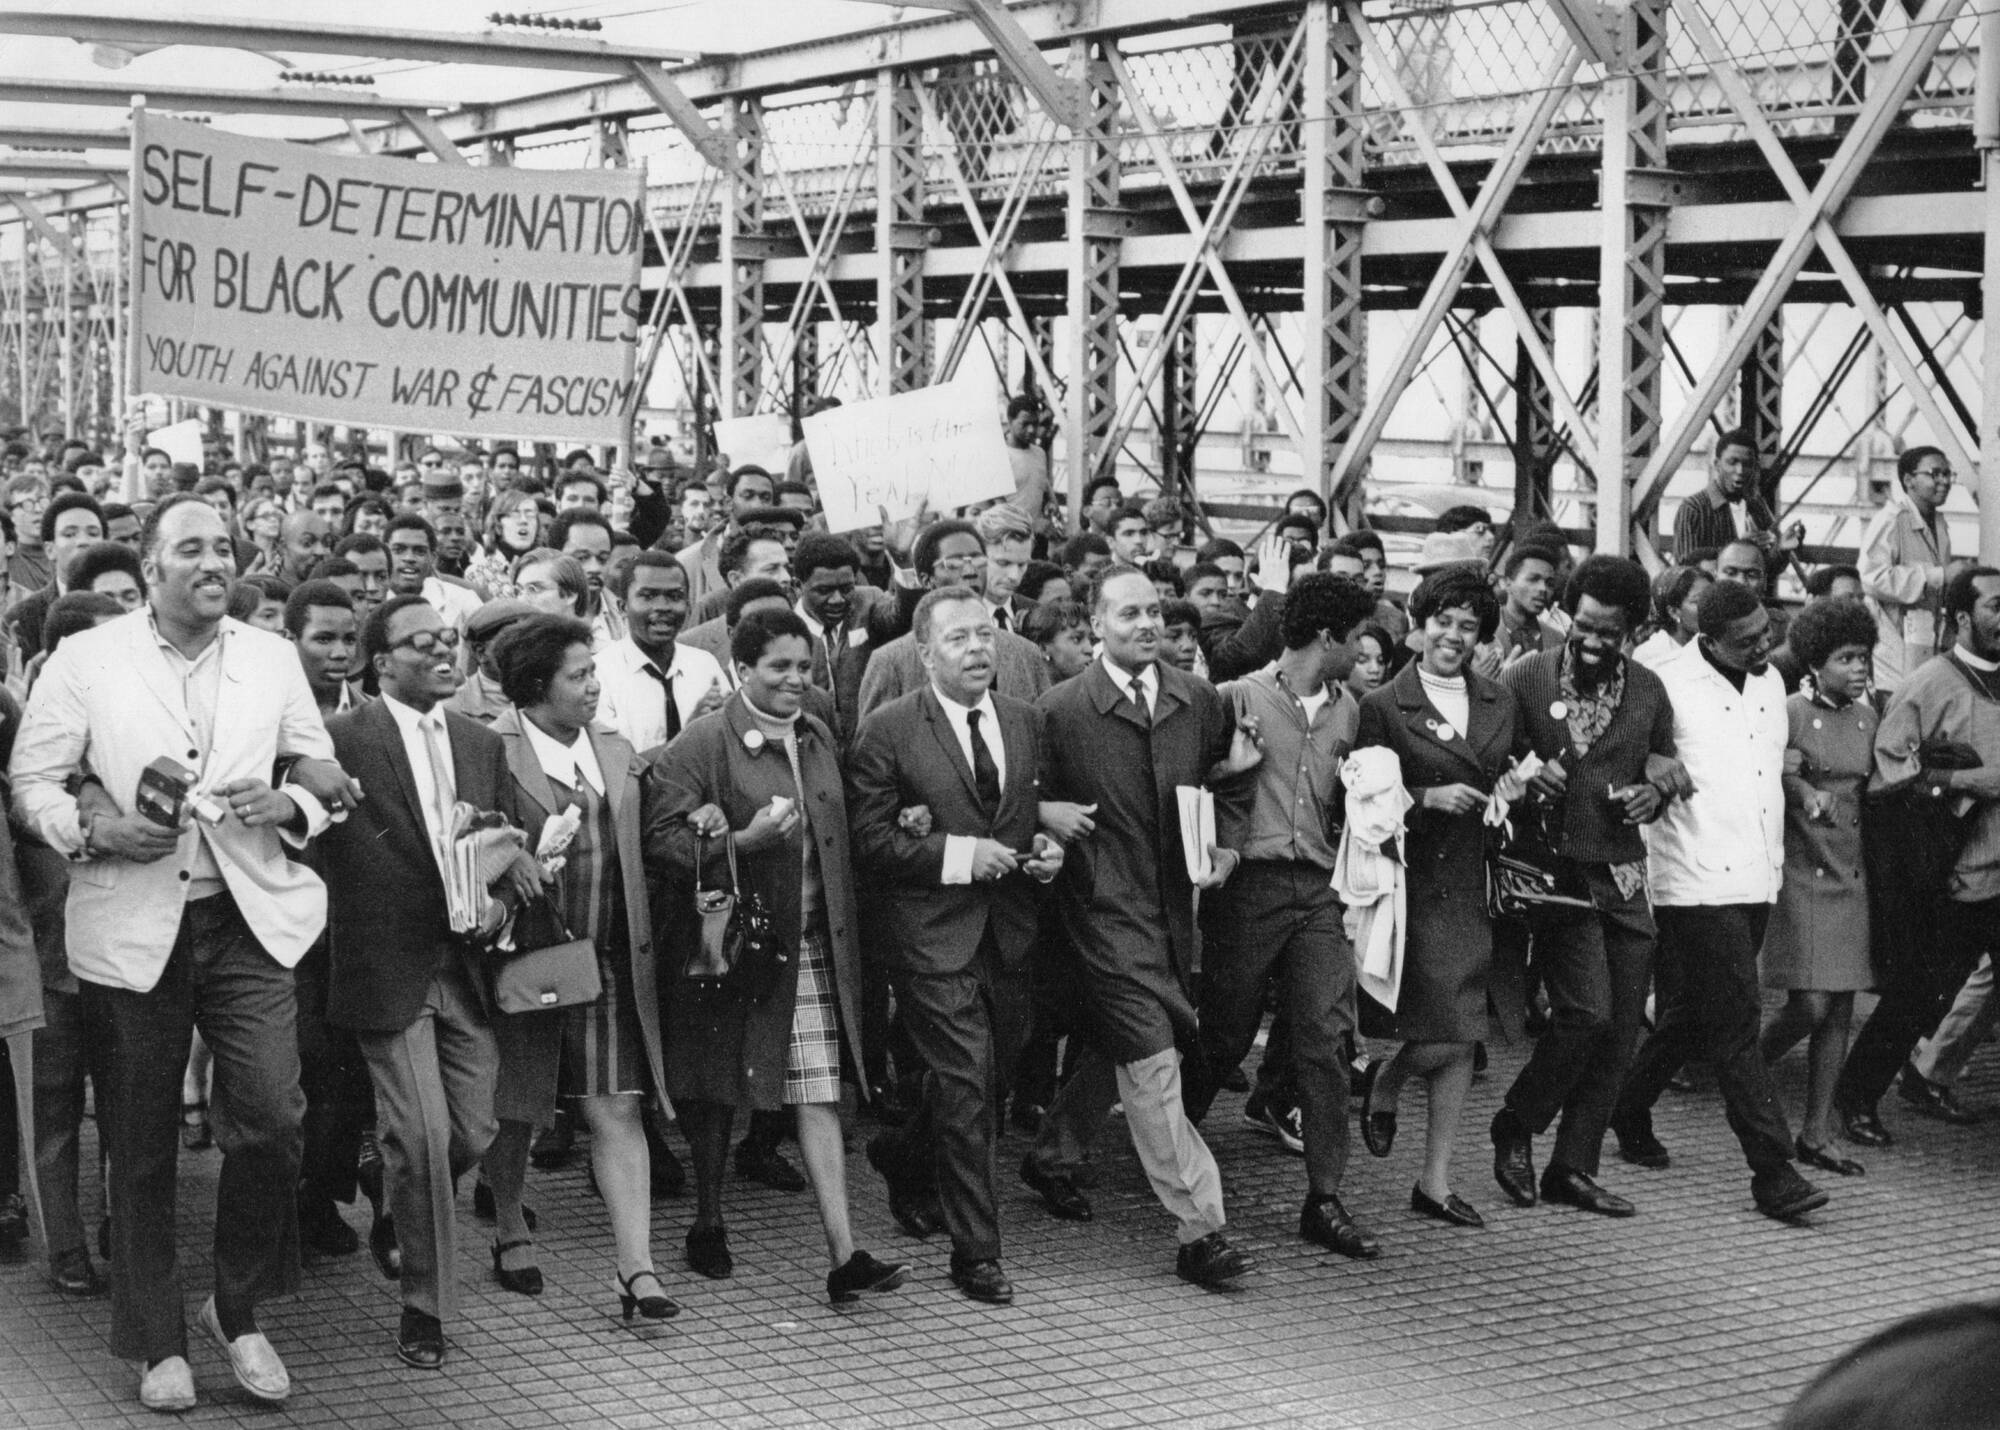 Black education advocates march over the Brooklyn Bridge together, arms linked. A large sign reads &quot;Self-Determination for Black Communities, Youth Against War & Fascism&quot;